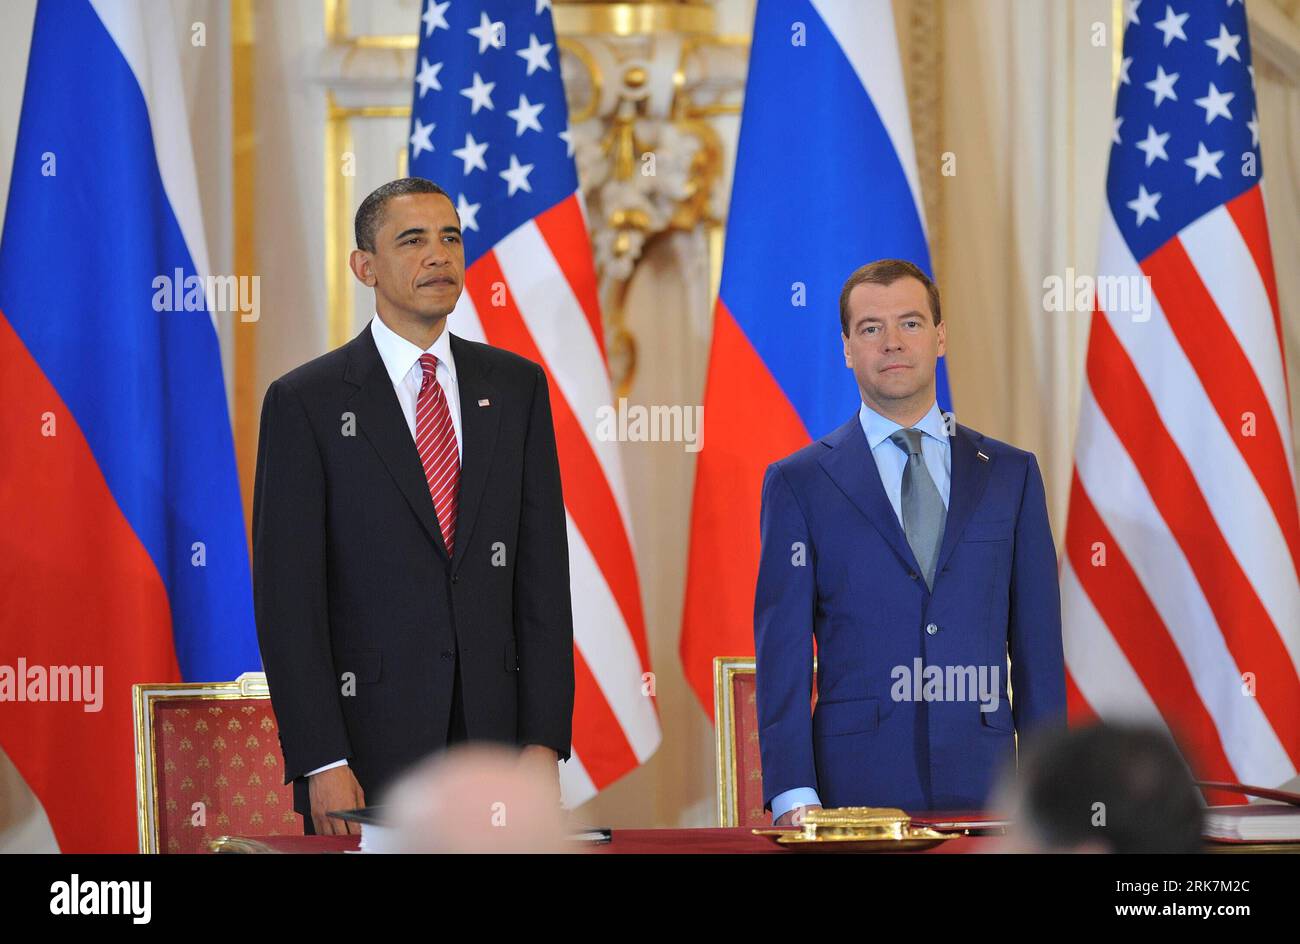 Bildnummer: 53927165  Datum: 08.04.2010  Copyright: imago/Xinhua (100408) -- PRAGUE, April 8, 2010 (Xinhua) -- U.S. President Barack Obama (L) and his Russian counterpart Dmitry Medvedev prepare to sign a landmark nuclear arms reduction treaty in Prague, capital of Czech Republic, on April 8, 2010. Under the new pact, the two countries agreed to reduce their deployed nuclear warheads to 1,550 each, or 30 percent below the current level of 2,200, and cut the launchers below 700 each.(Xinhua/Wu Wei) (lyx) (9)CZECH-PRAGUE-RUSSIA-US-TREATY PUBLICATIONxNOTxINxCHN People Politik Prag Abrüstung Abrüs Stock Photo